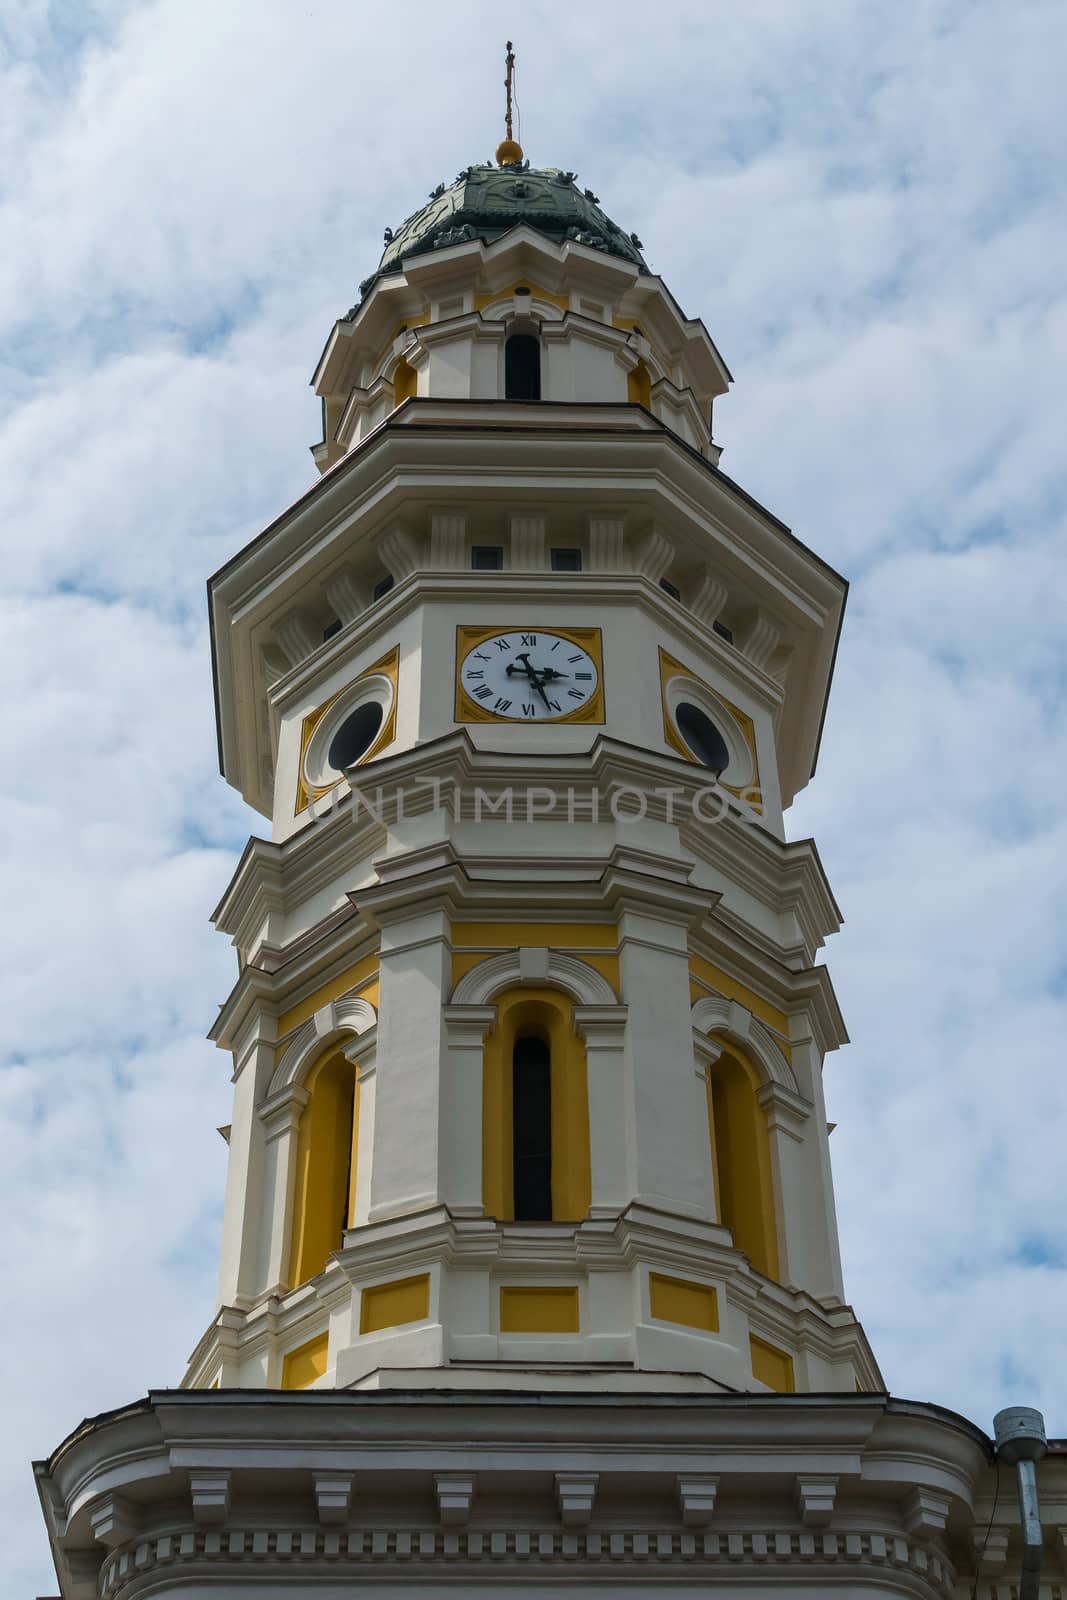 Ancient beautiful tower with a clock with a pointed spire on the top piercing the heavens by Adamchuk